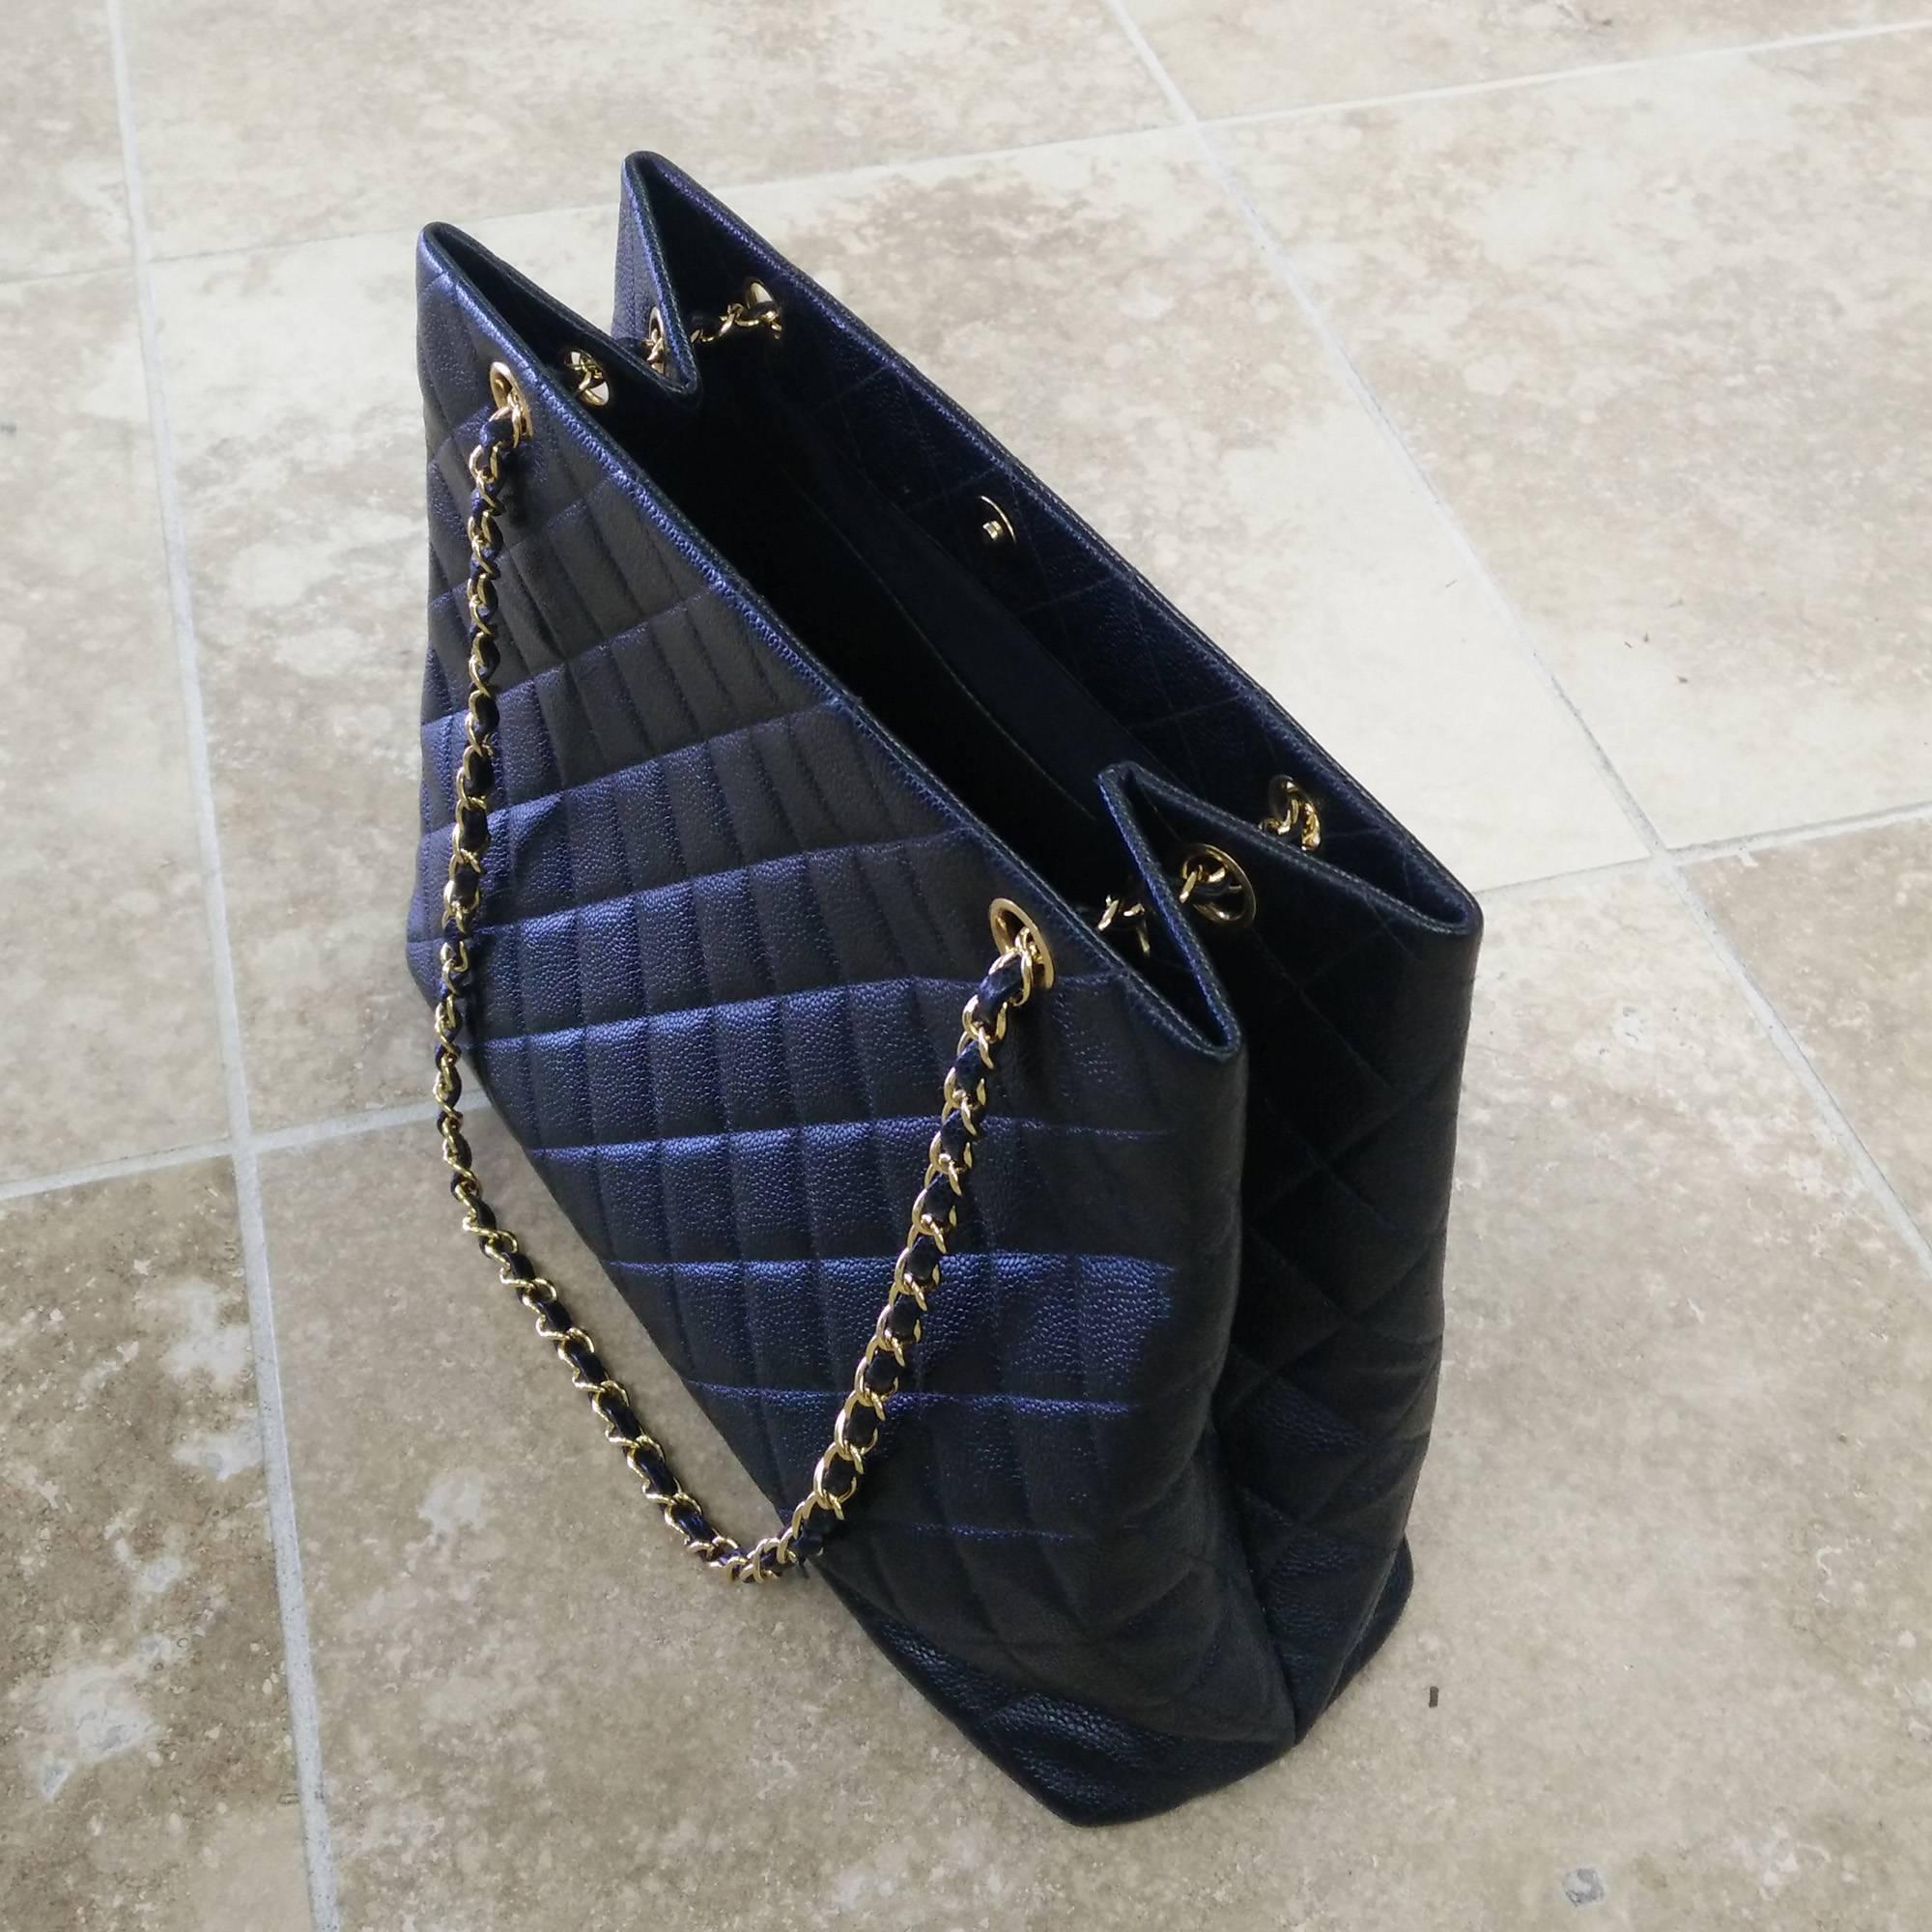 You are viewing a Pre-owned authentic Chanel Caviar black quilted leather shopper. The soft black quilted leather of this bag blends perfectly with the Chanel gold hardware and 